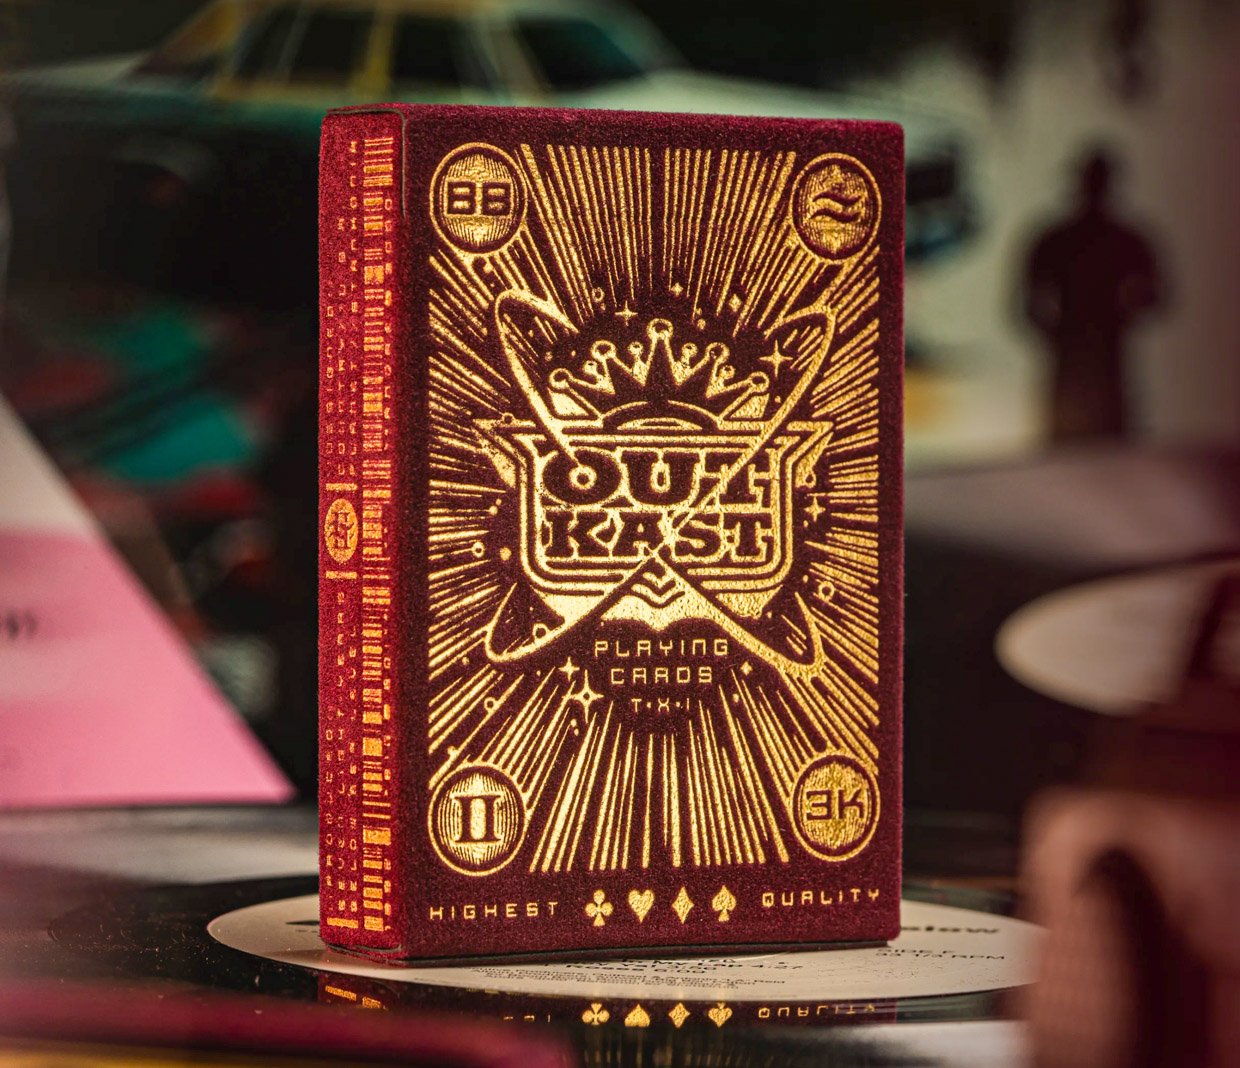 Theory11 x Outkast Playing Cards Are So Fresh, So Clean #Outkast